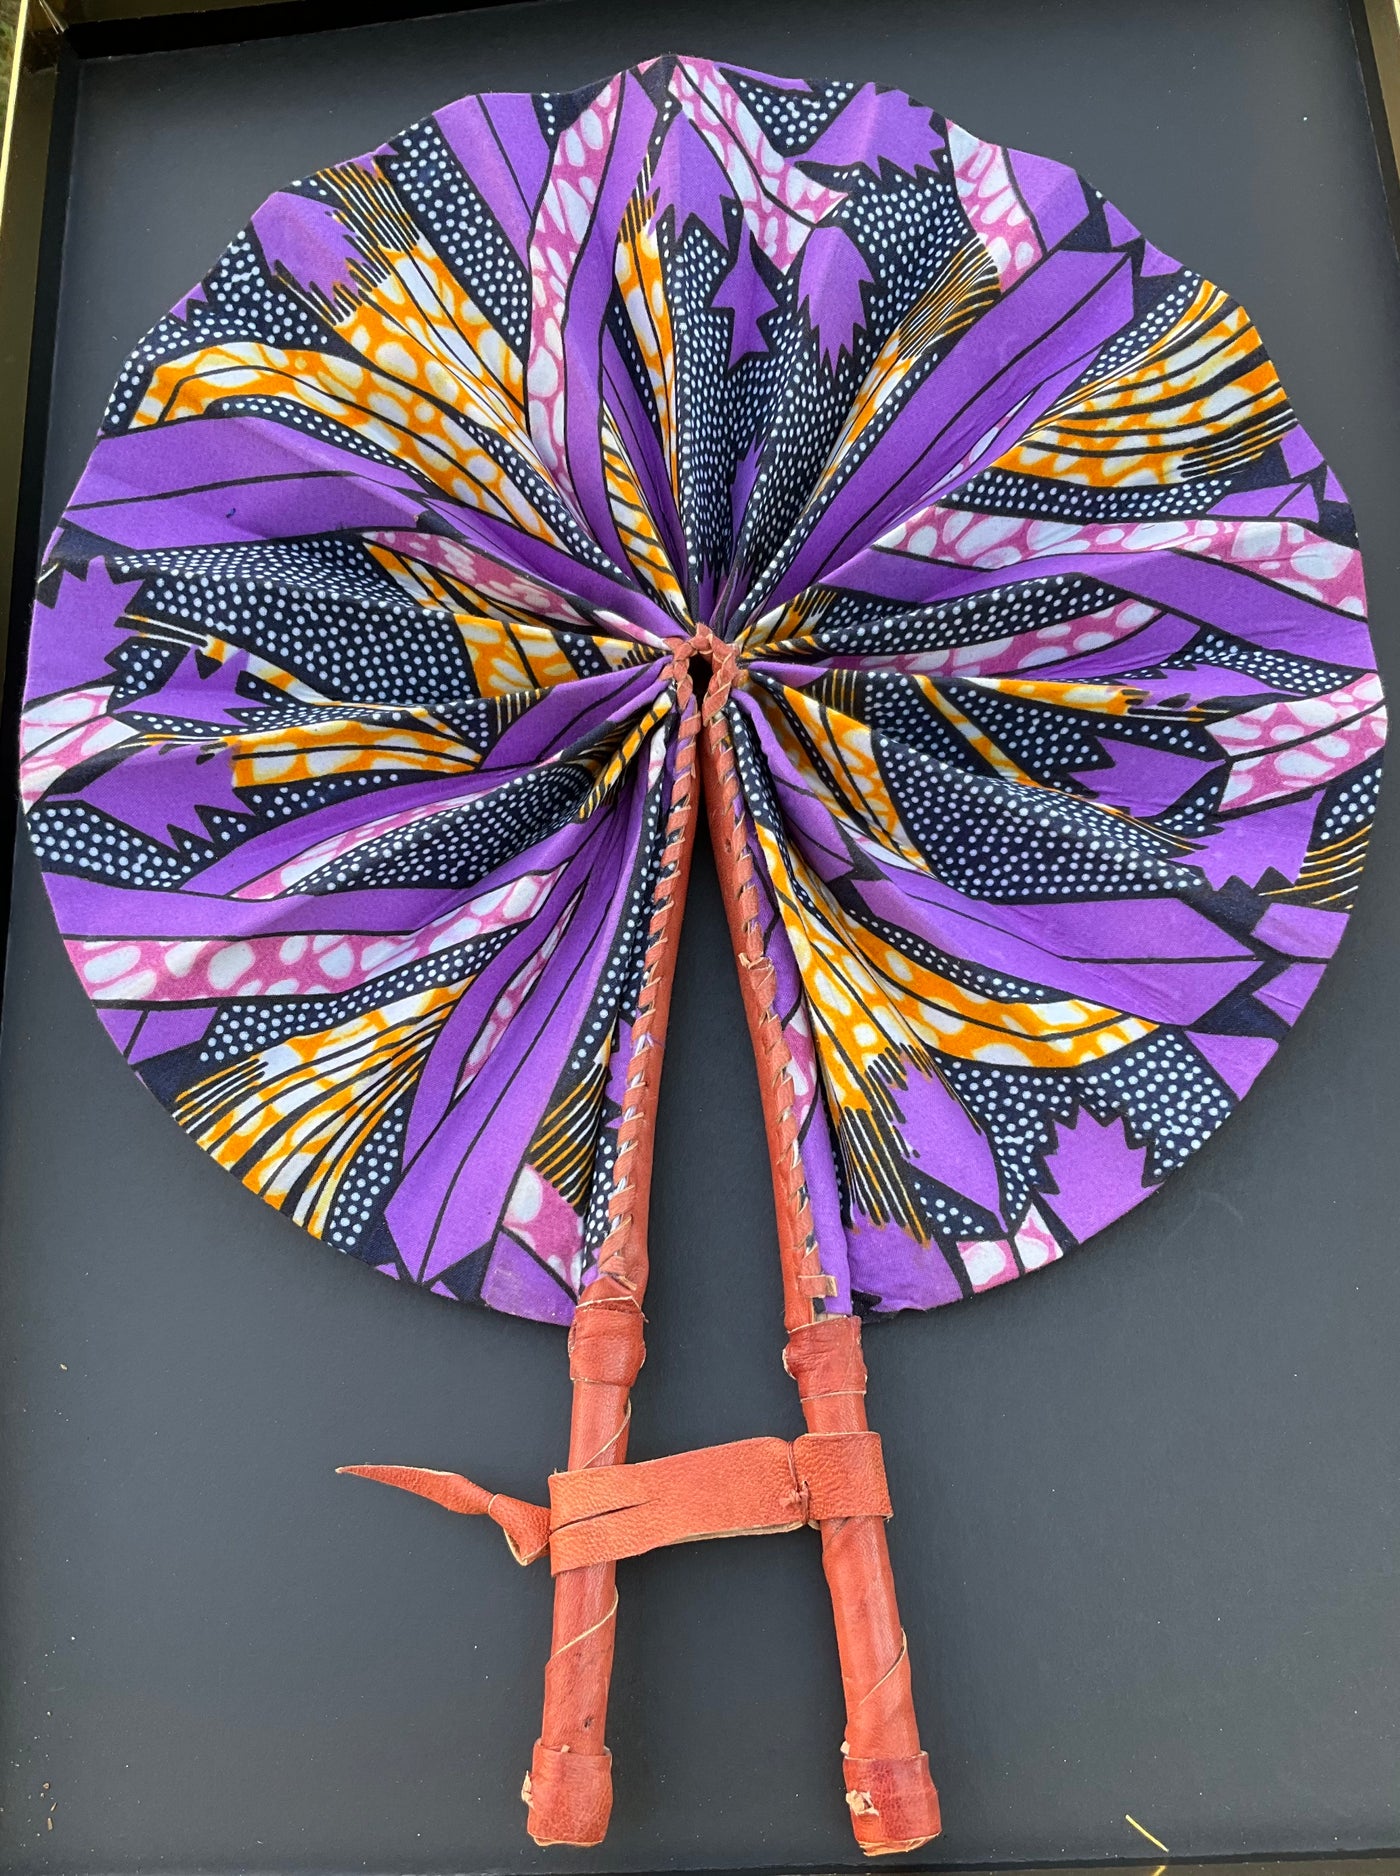 Decorative & Functional Traditional Ghanaian Fans